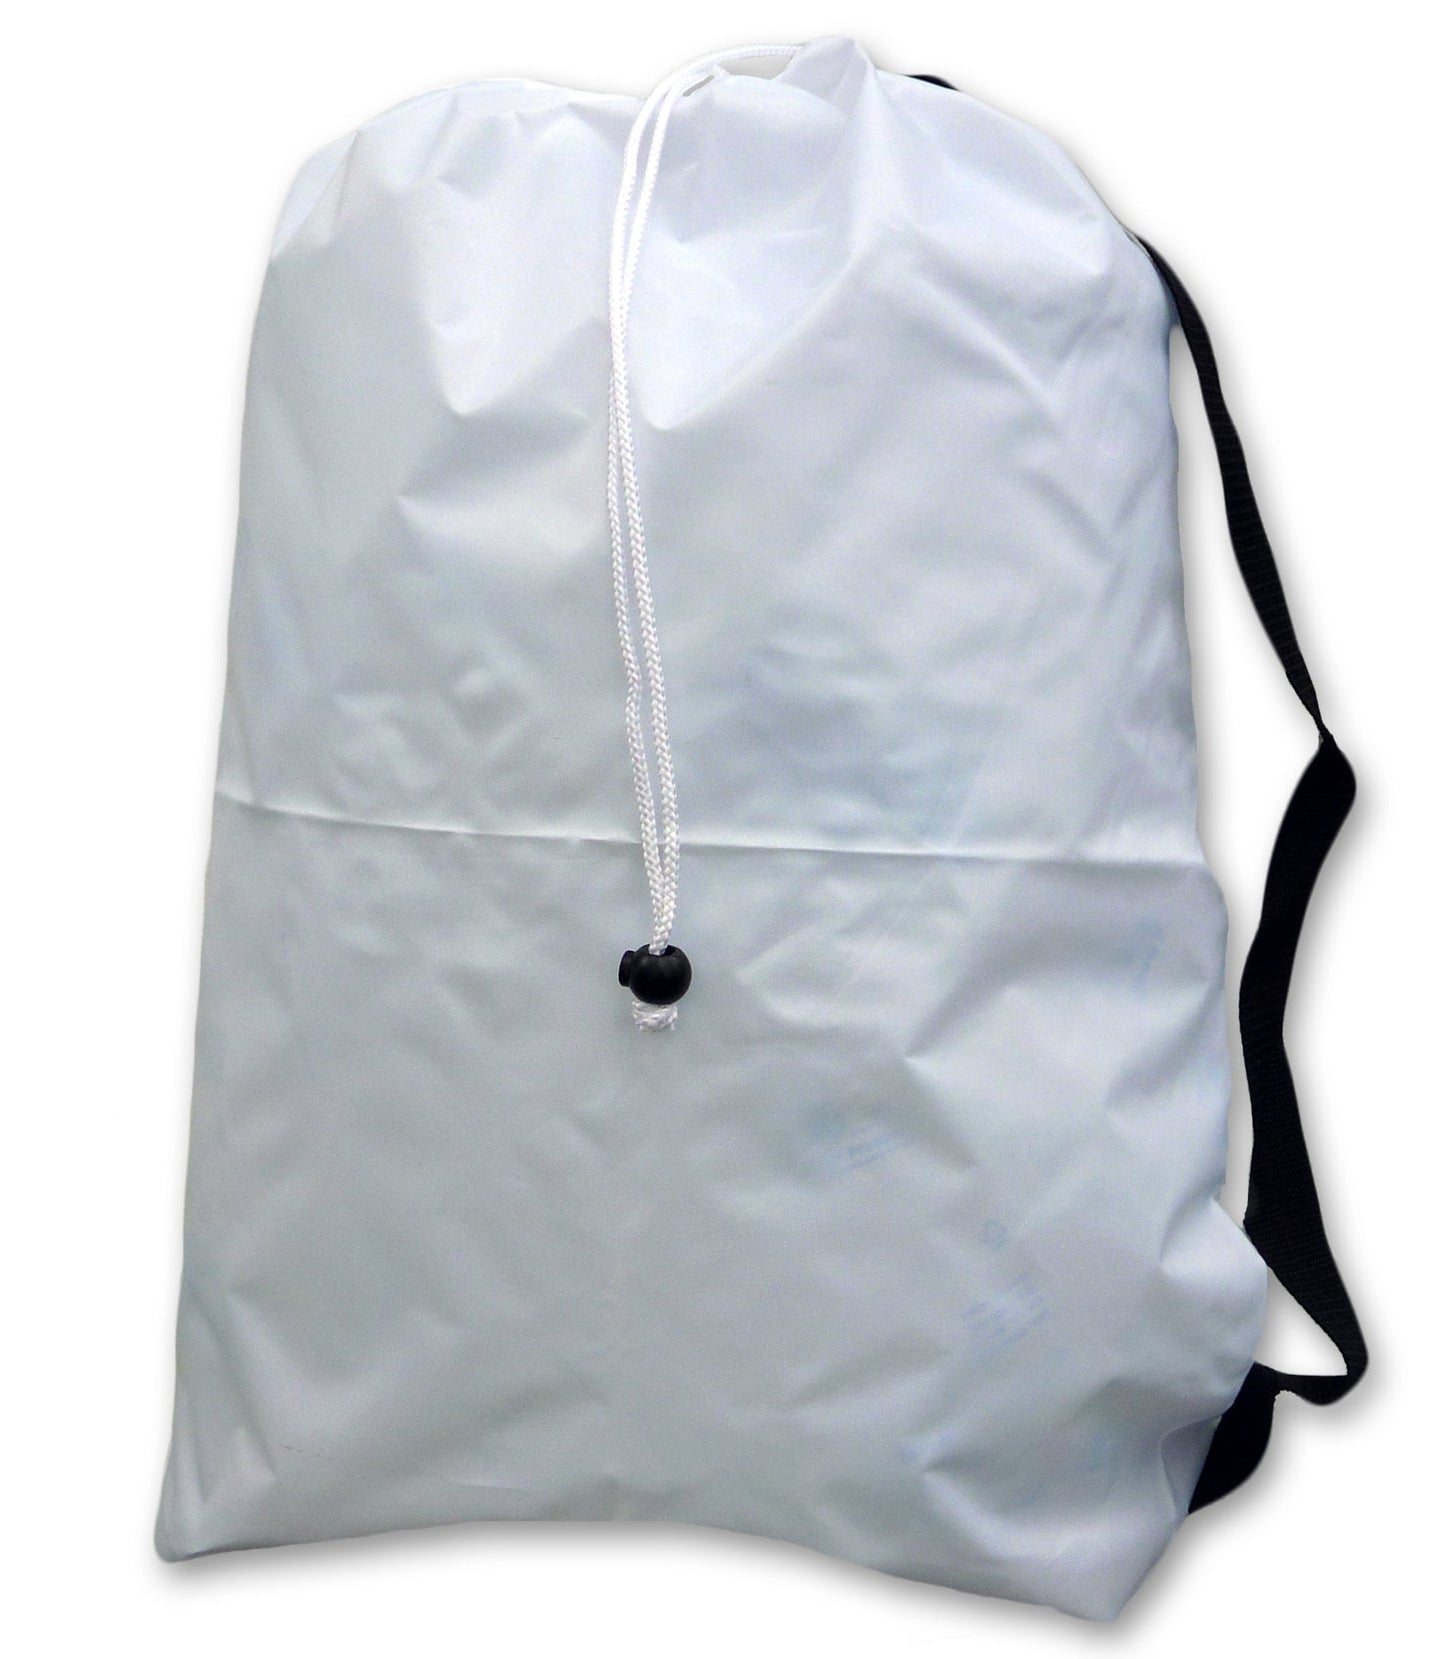 Small Laundry Bag with Strap, White